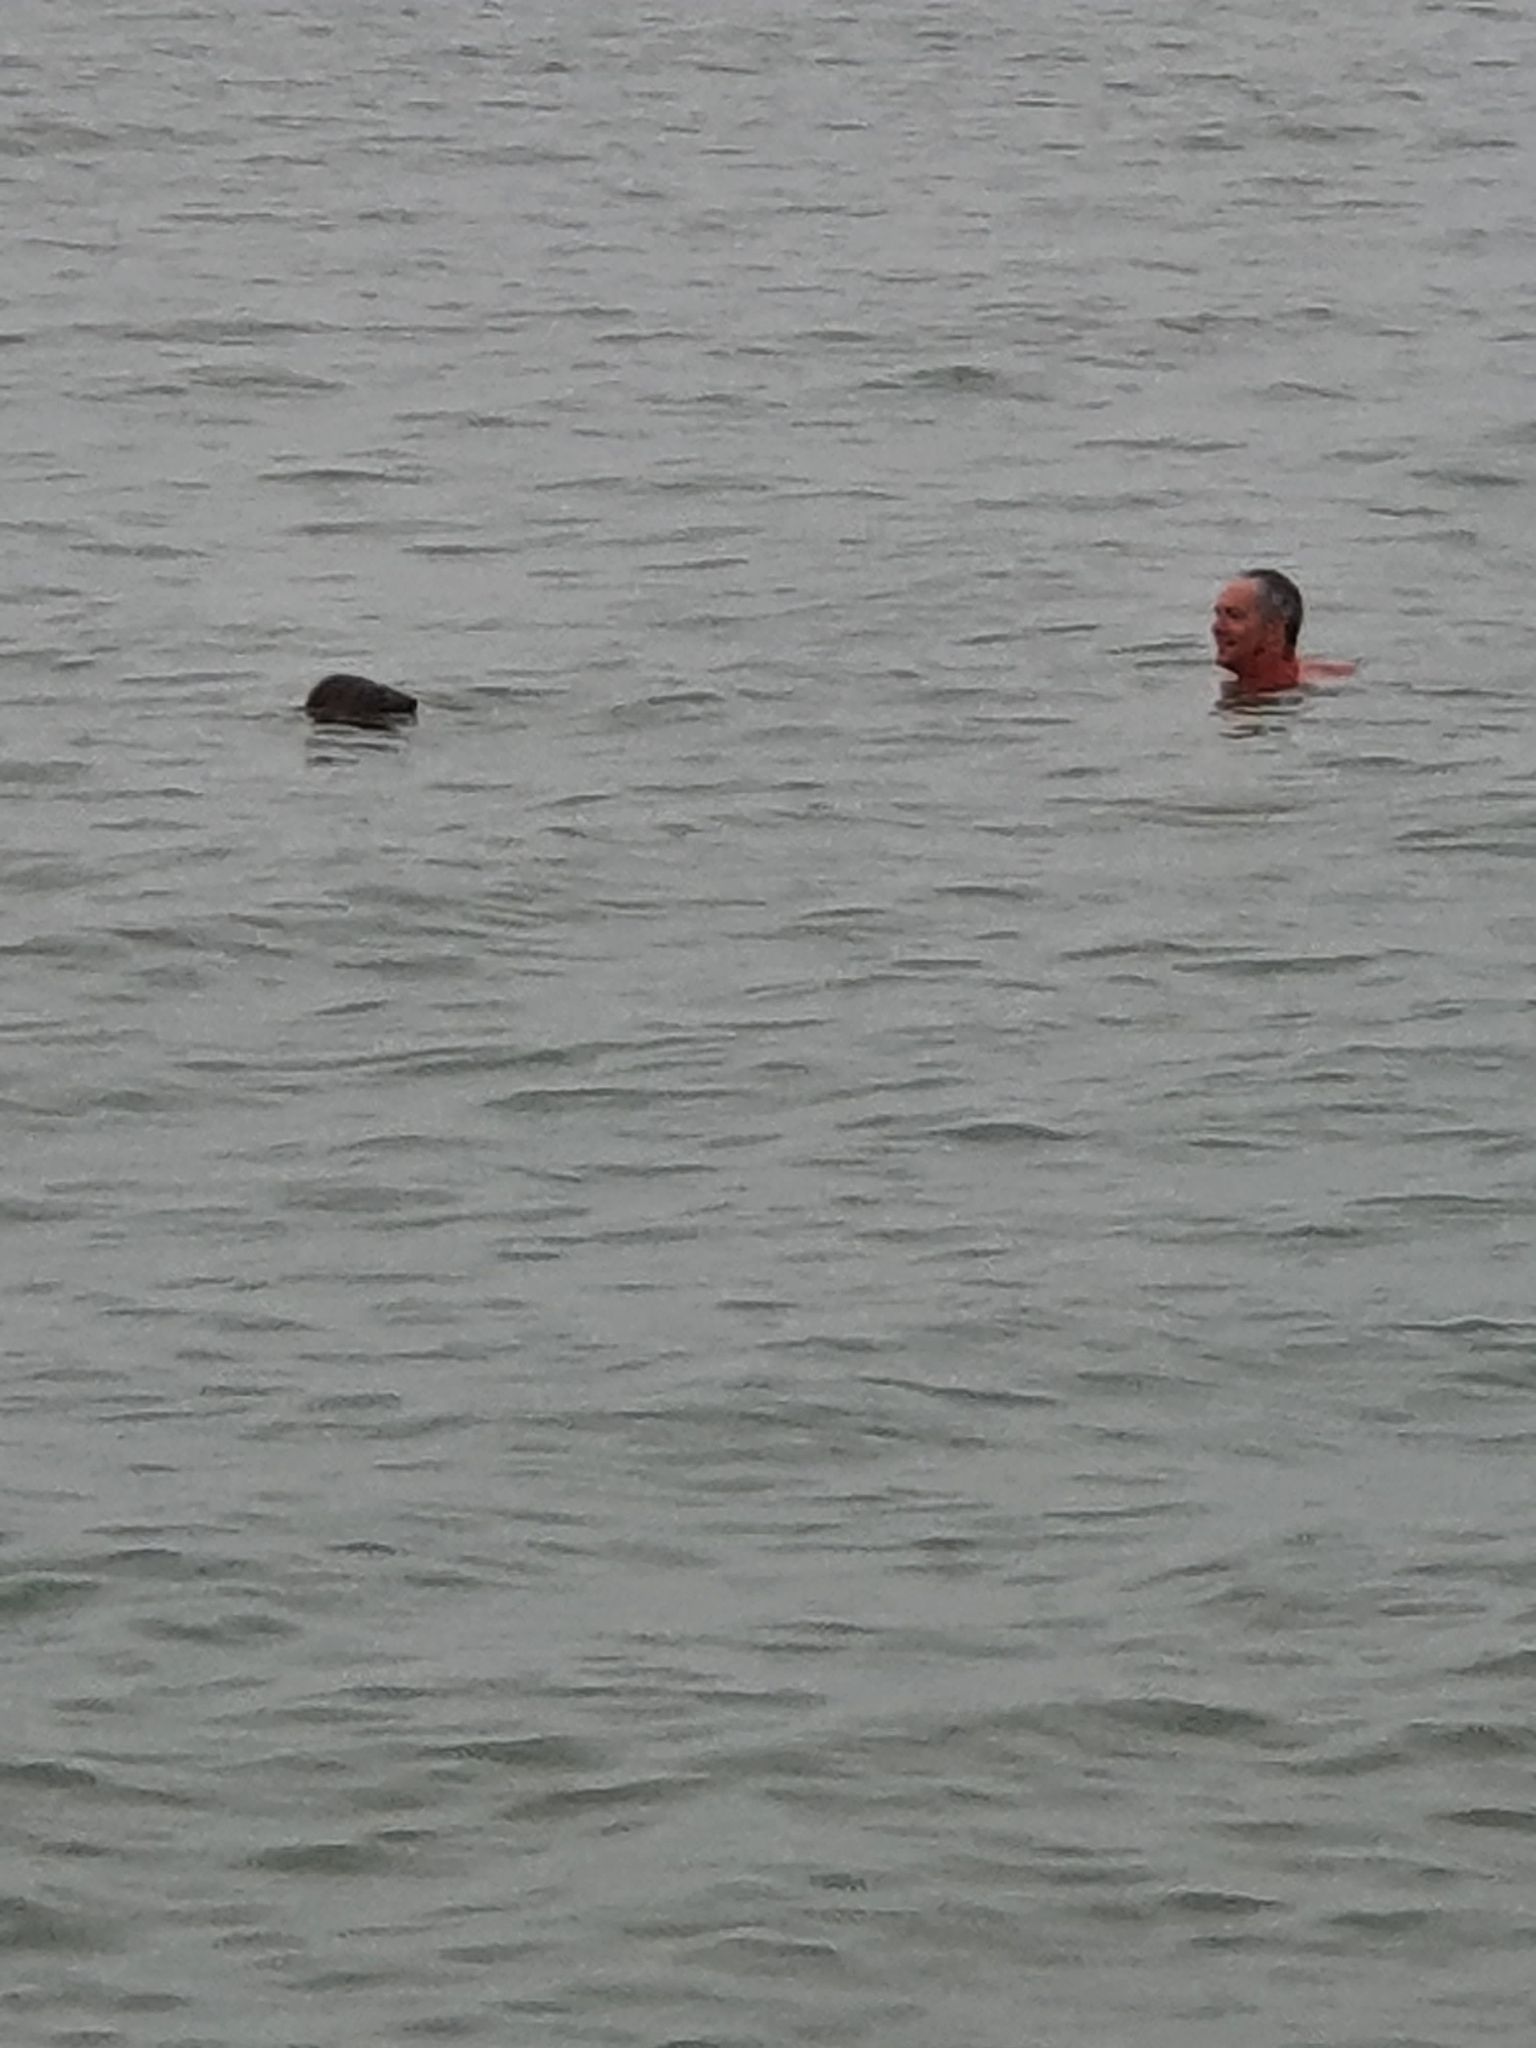 Chris Balcombe swiming with a seal at Lepe, Hampshire